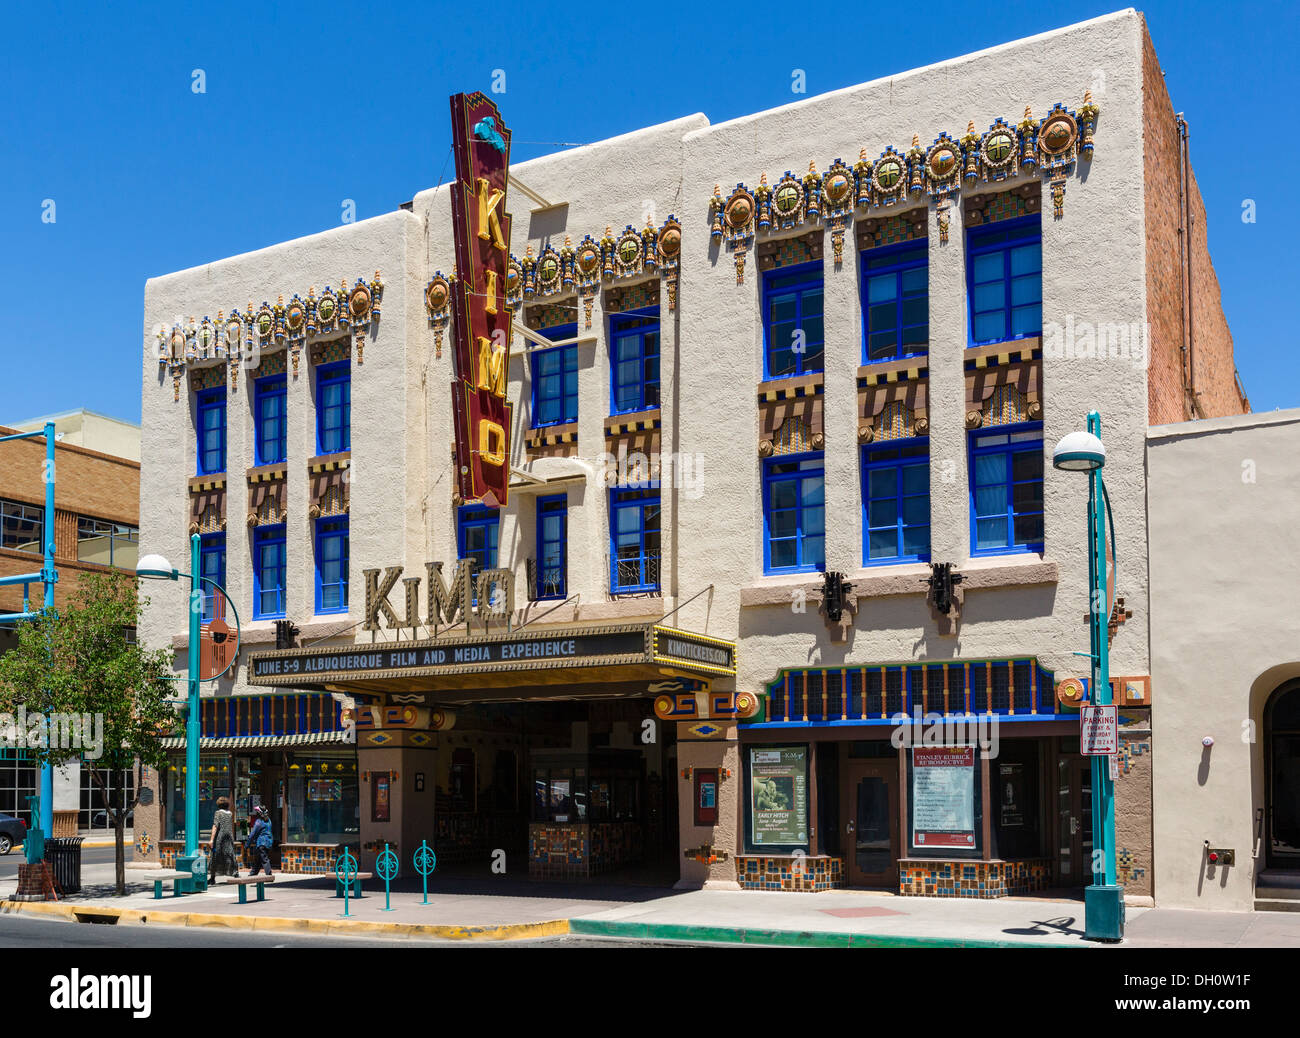 The historic KiMo Theater on Central Avenue (old Route 66) in downtown Albuquerque, New Mexico, USA Stock Photo